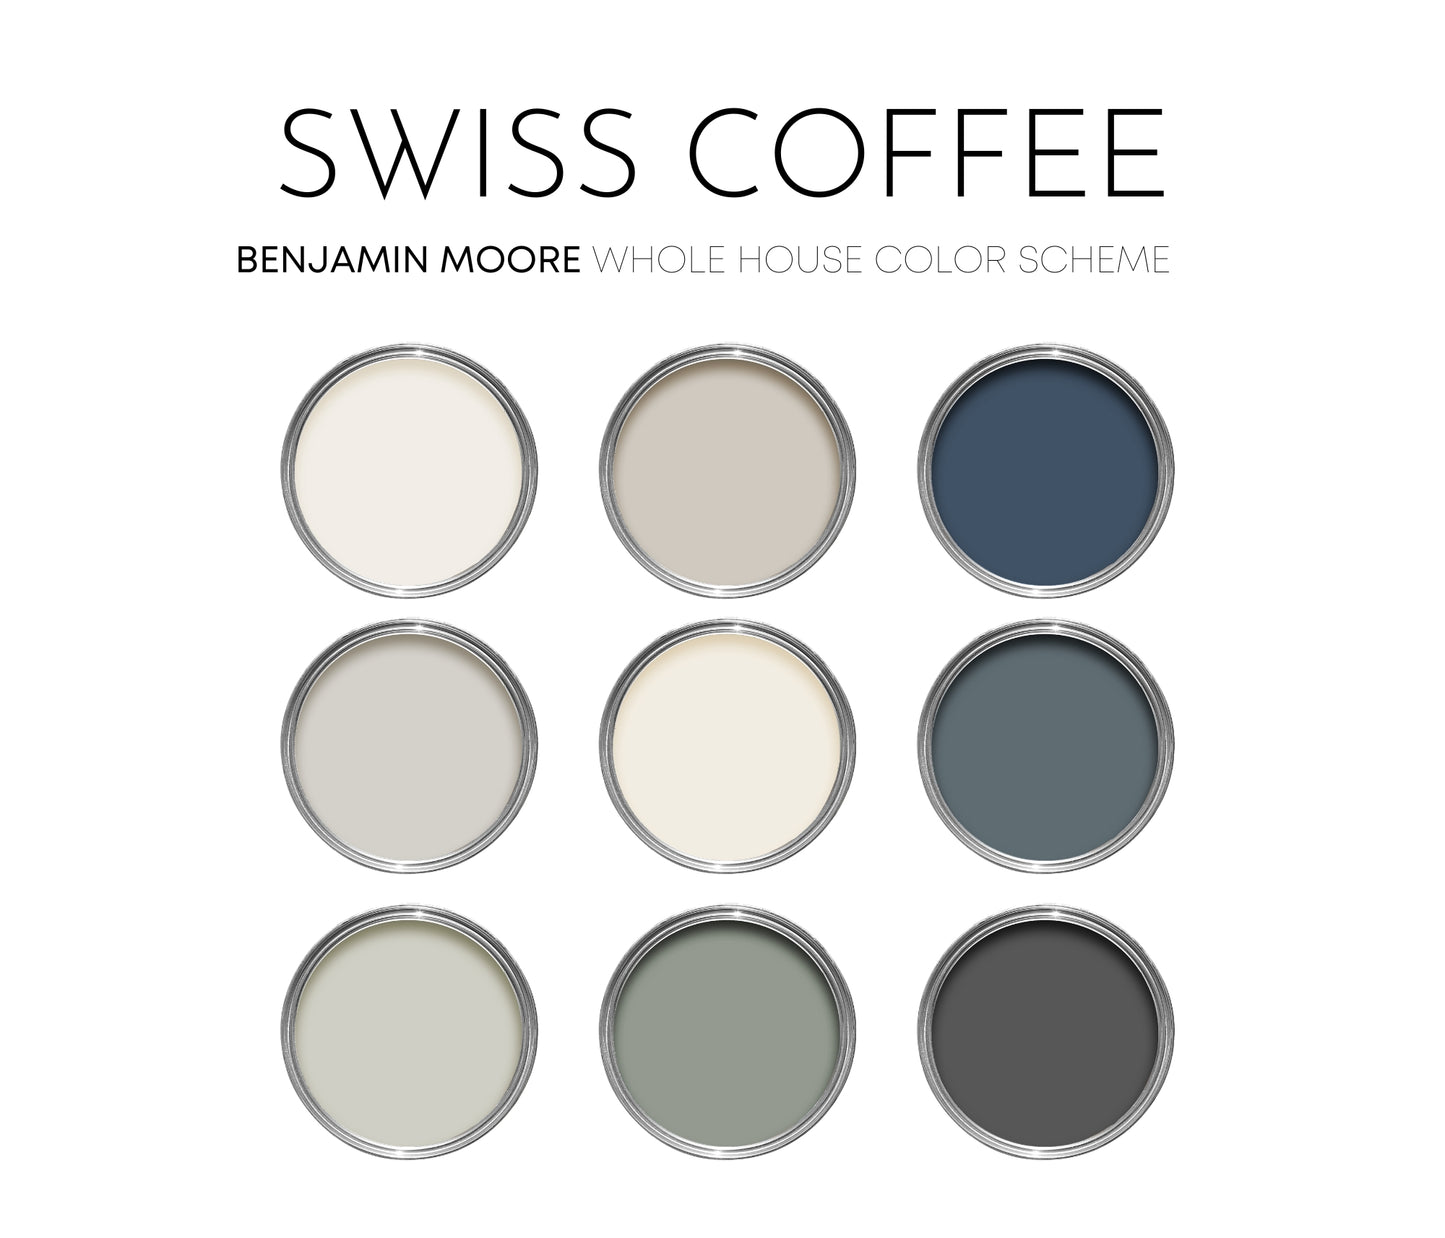 Swiss Coffee Benajmain Moore Paint Palette, Modern Neutral Interior Paint Colors for Home, Swiss Coffee Compliments, Warm Whites, Apparition